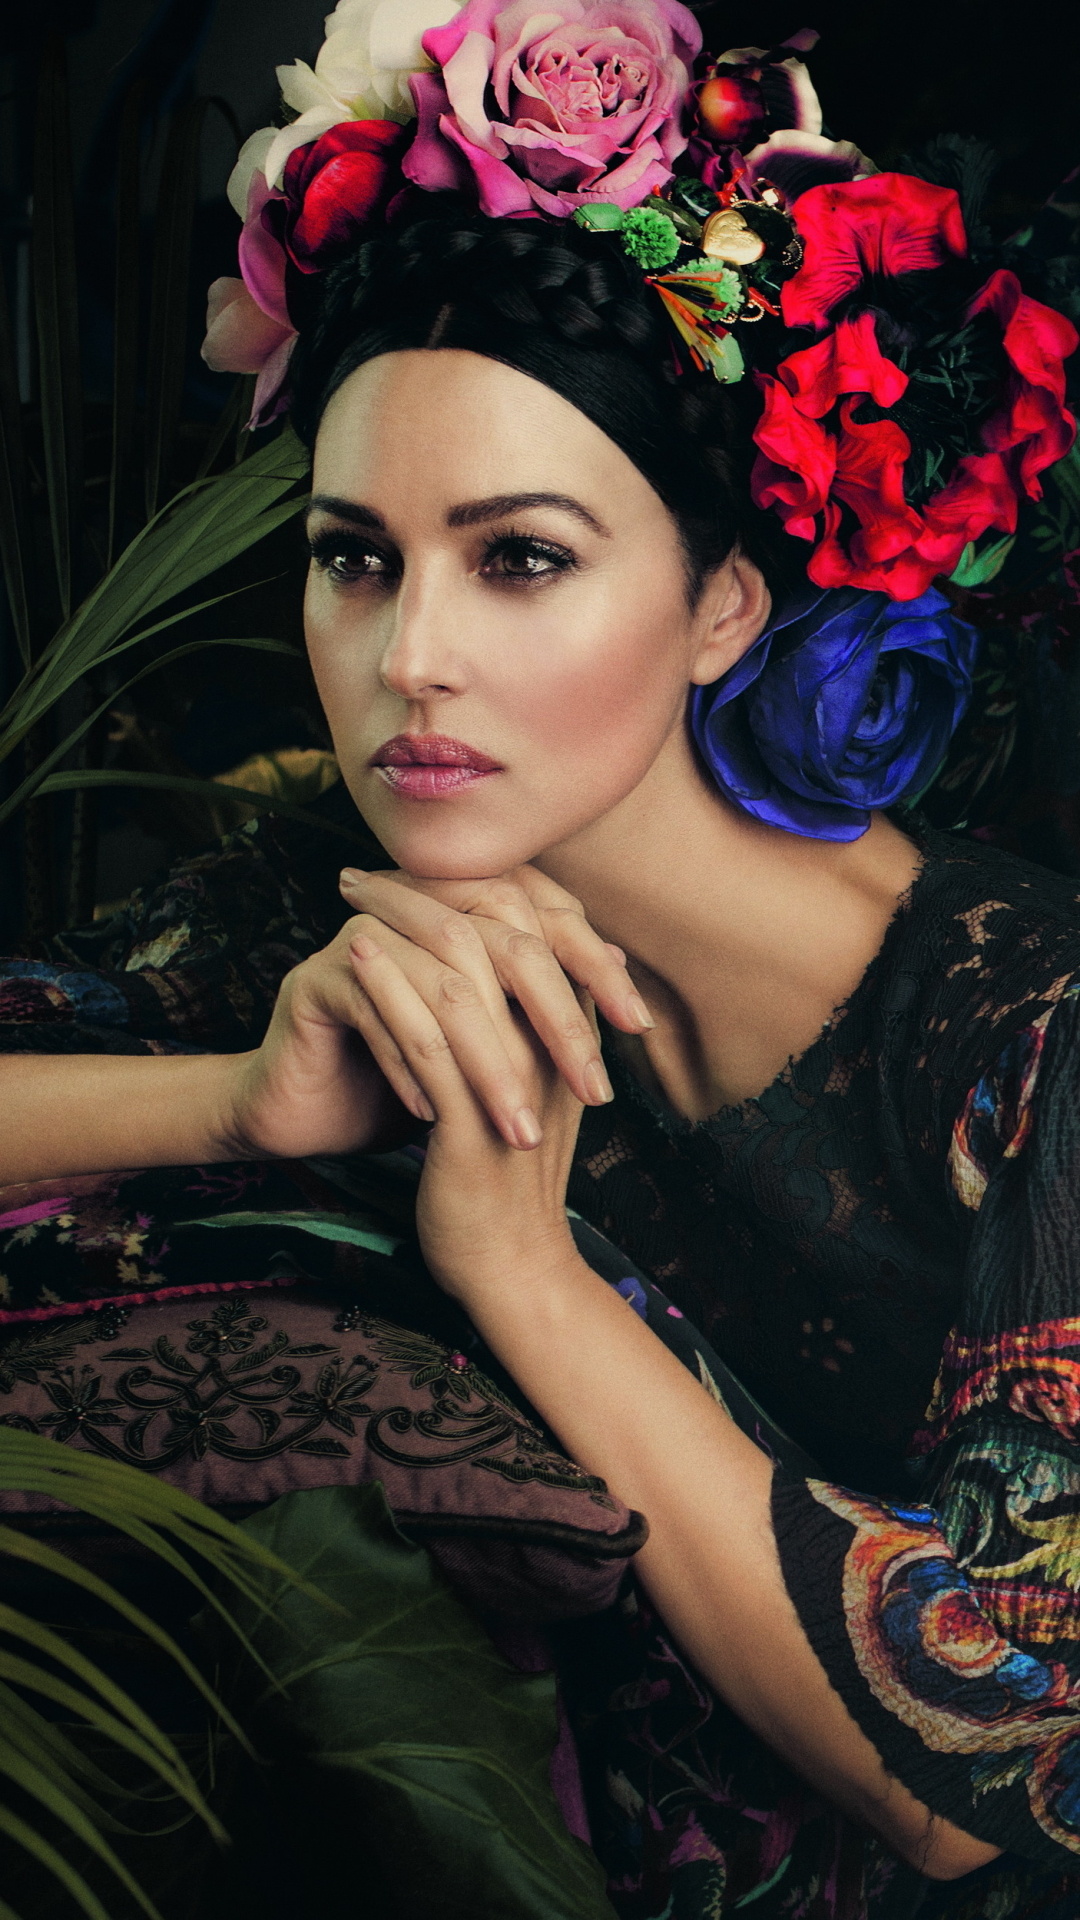 Monica Bellucci: Celebrity, The third-richest actress in Italy, 2020. 1080x1920 Full HD Background.